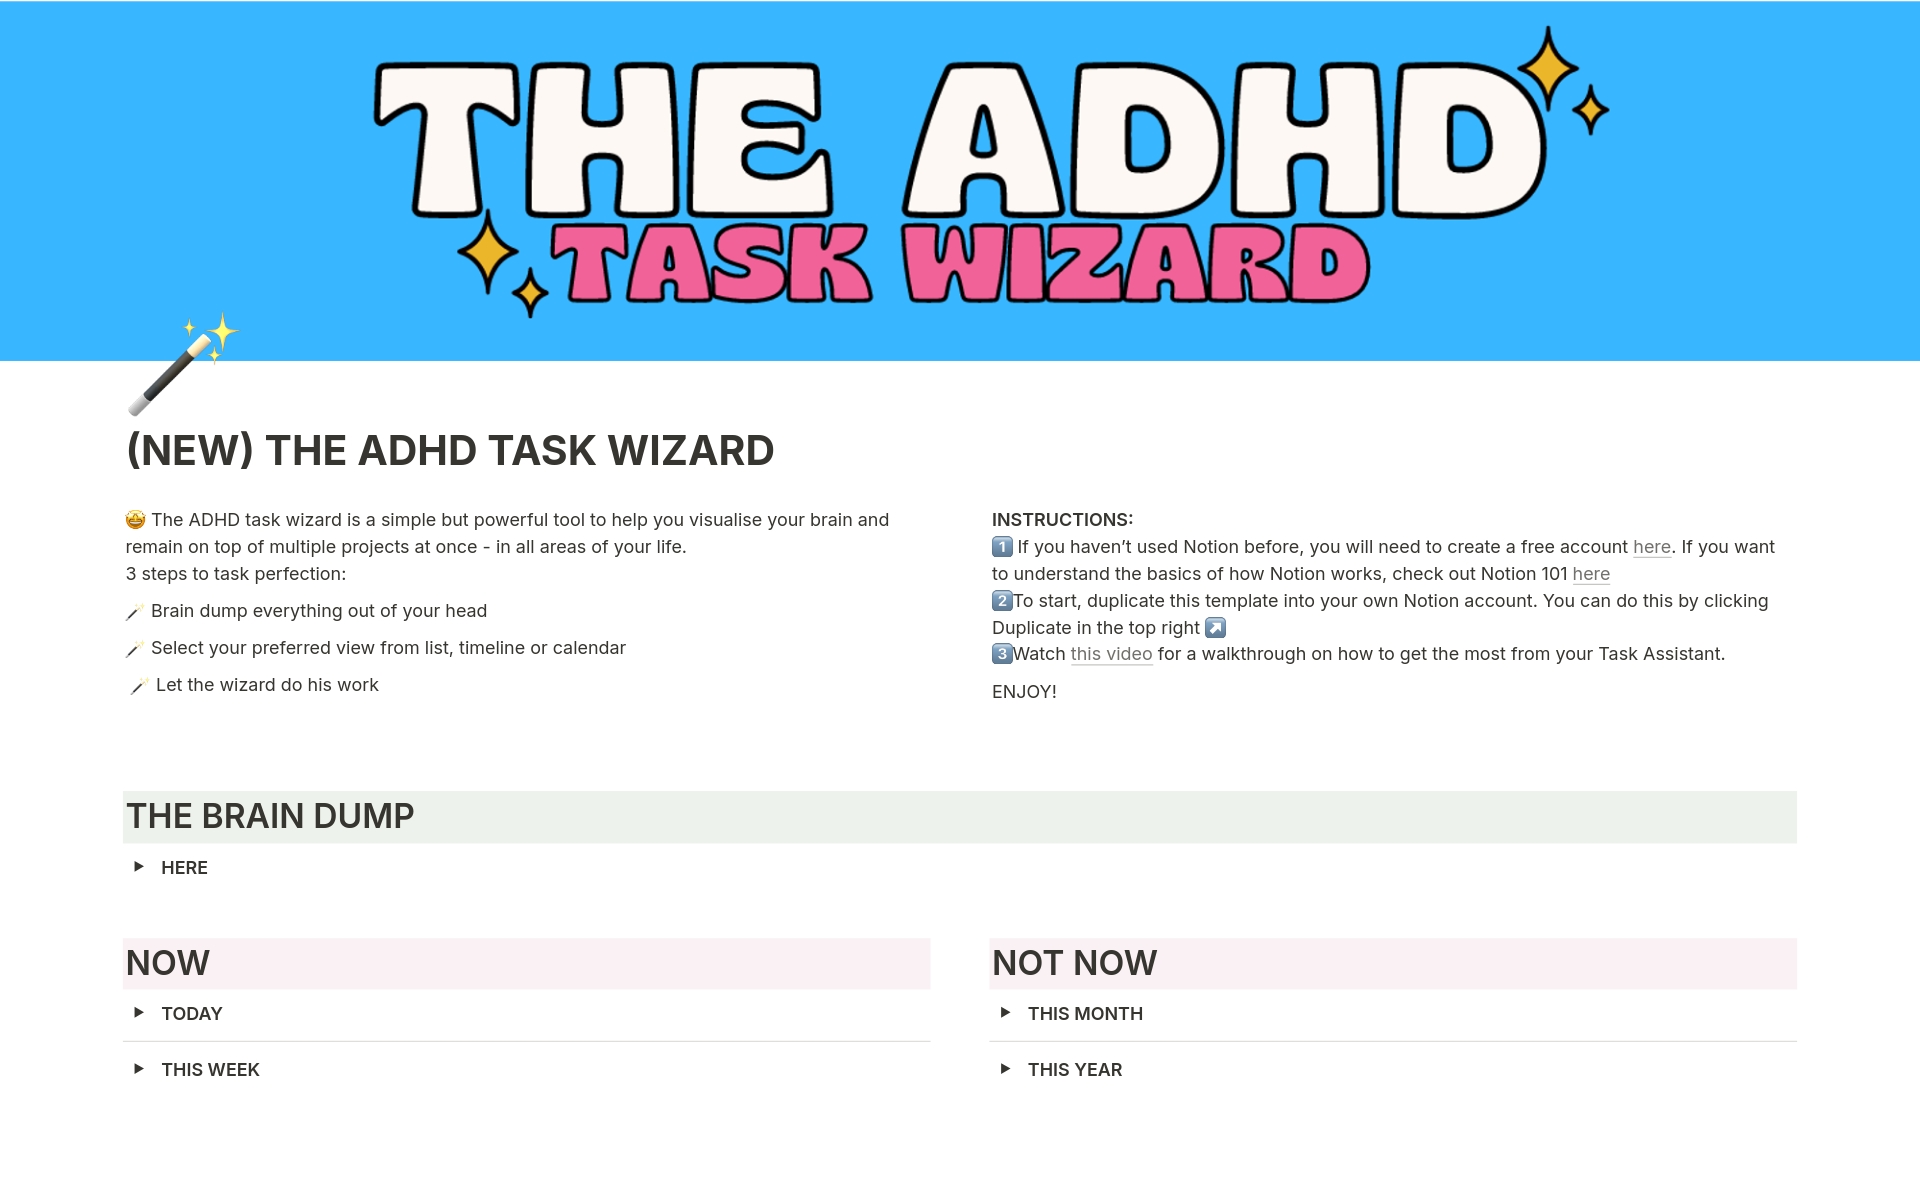 Say goodbye to time collapse forever with The ADHD Task Wizard.